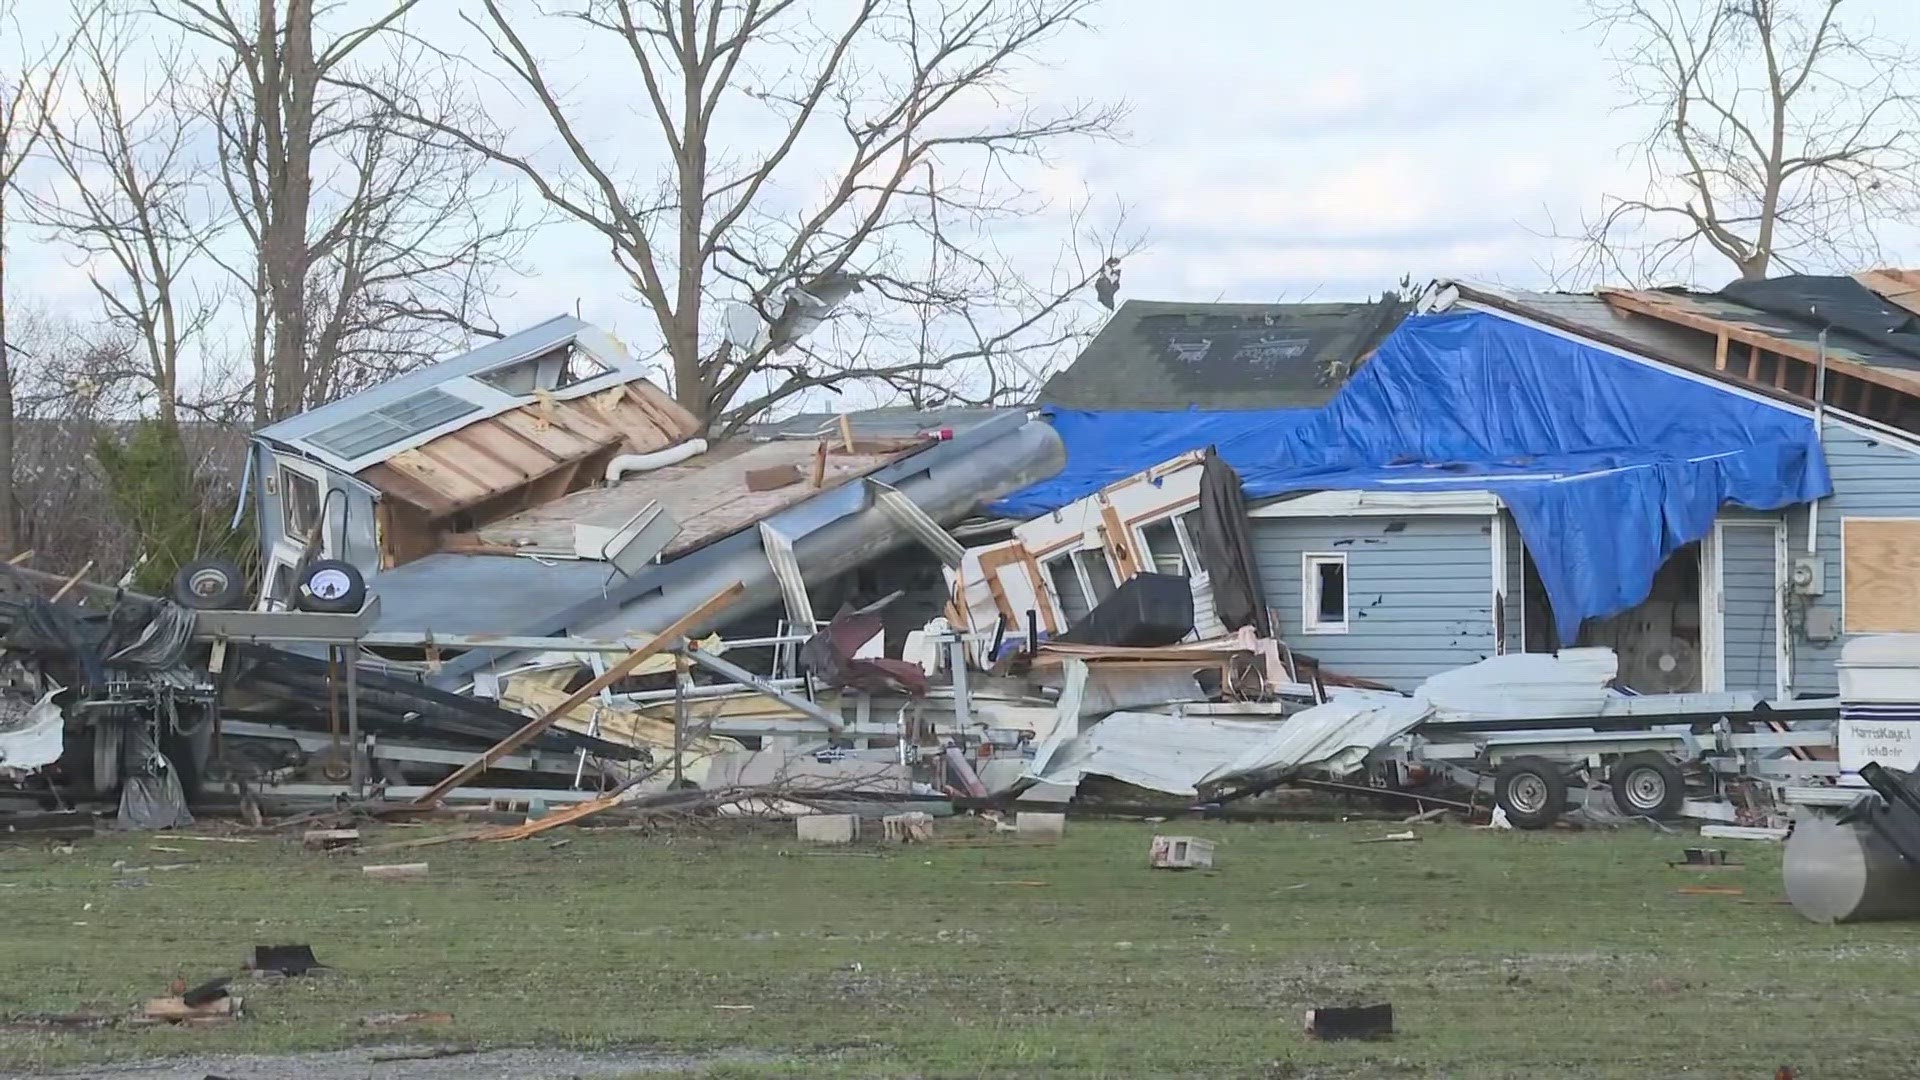 One twister in Logan County left three people dead, while Richland County also endured severe damage.